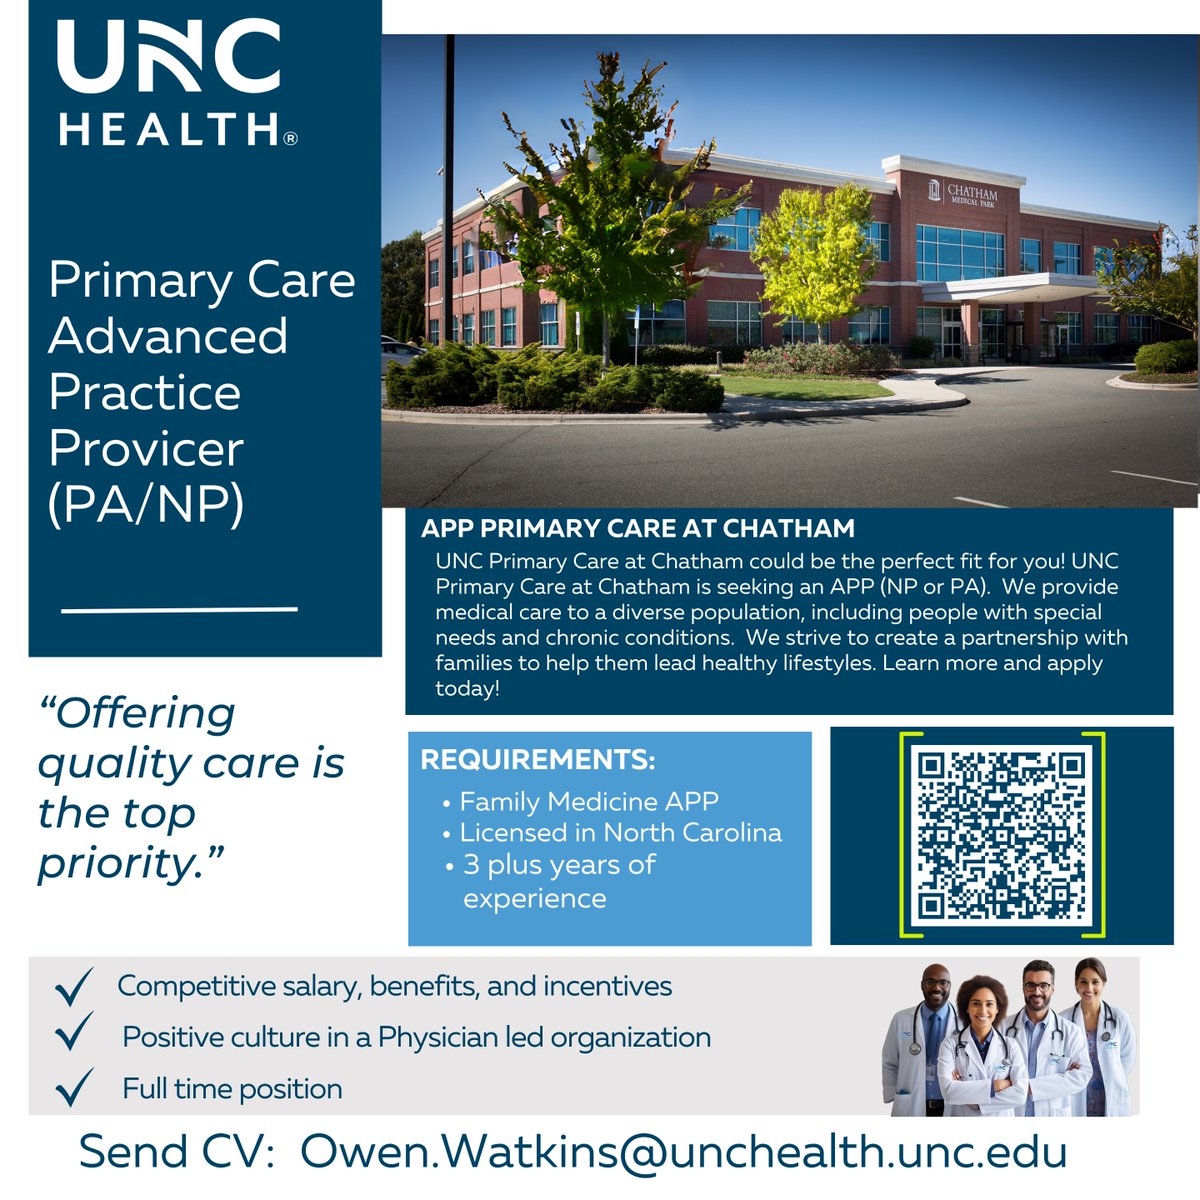 We seek an experienced Primary Care Advanced Practice Provider (NP/PA) to join our #OneGreatTeam at UNC Primary Care at Chatham. #PrimaryCare #Medicine #UNCHealth #APP

jobs.unchealthcare.org/jobs/13538625-…

#AdvancedPracticeProvider #PhysicianAssistant #NursePractitioner #PhysicianAssociate